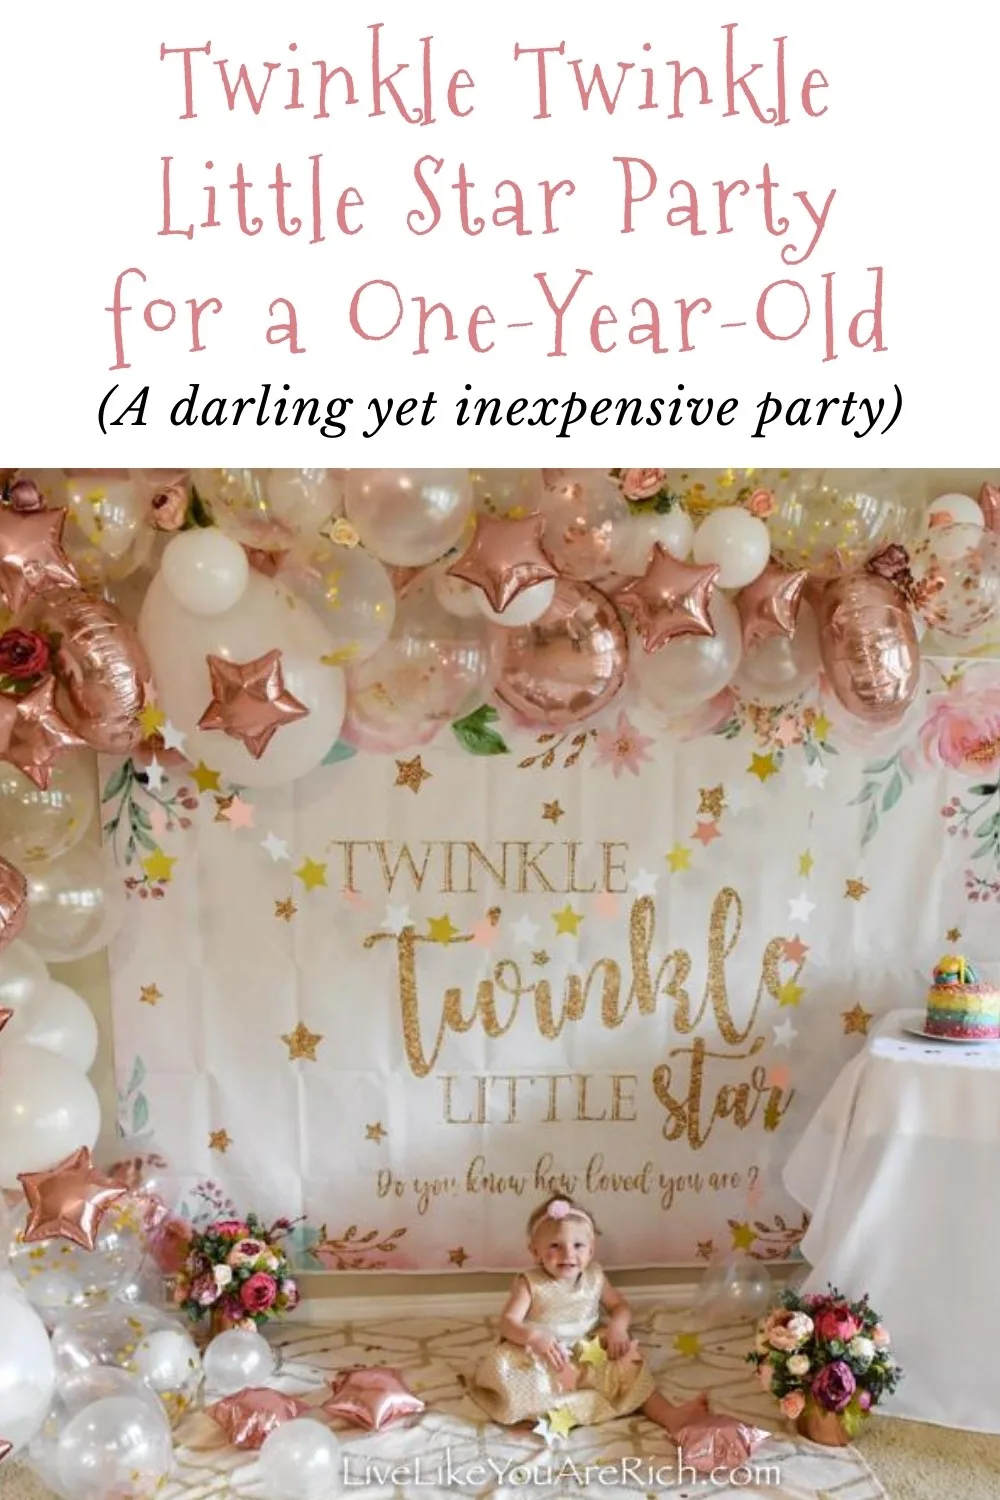 Our daughter, Amelia, loves the song “Twinkle Twinkle Little Star”. When ever it plays or I sing it, she”sings” along with. I wanted to celebrate her one year old birthday by doing this Twinkle Twinkle Little Star party for a one-year-old. This party was fairly simple to put together and was not too expensive either.